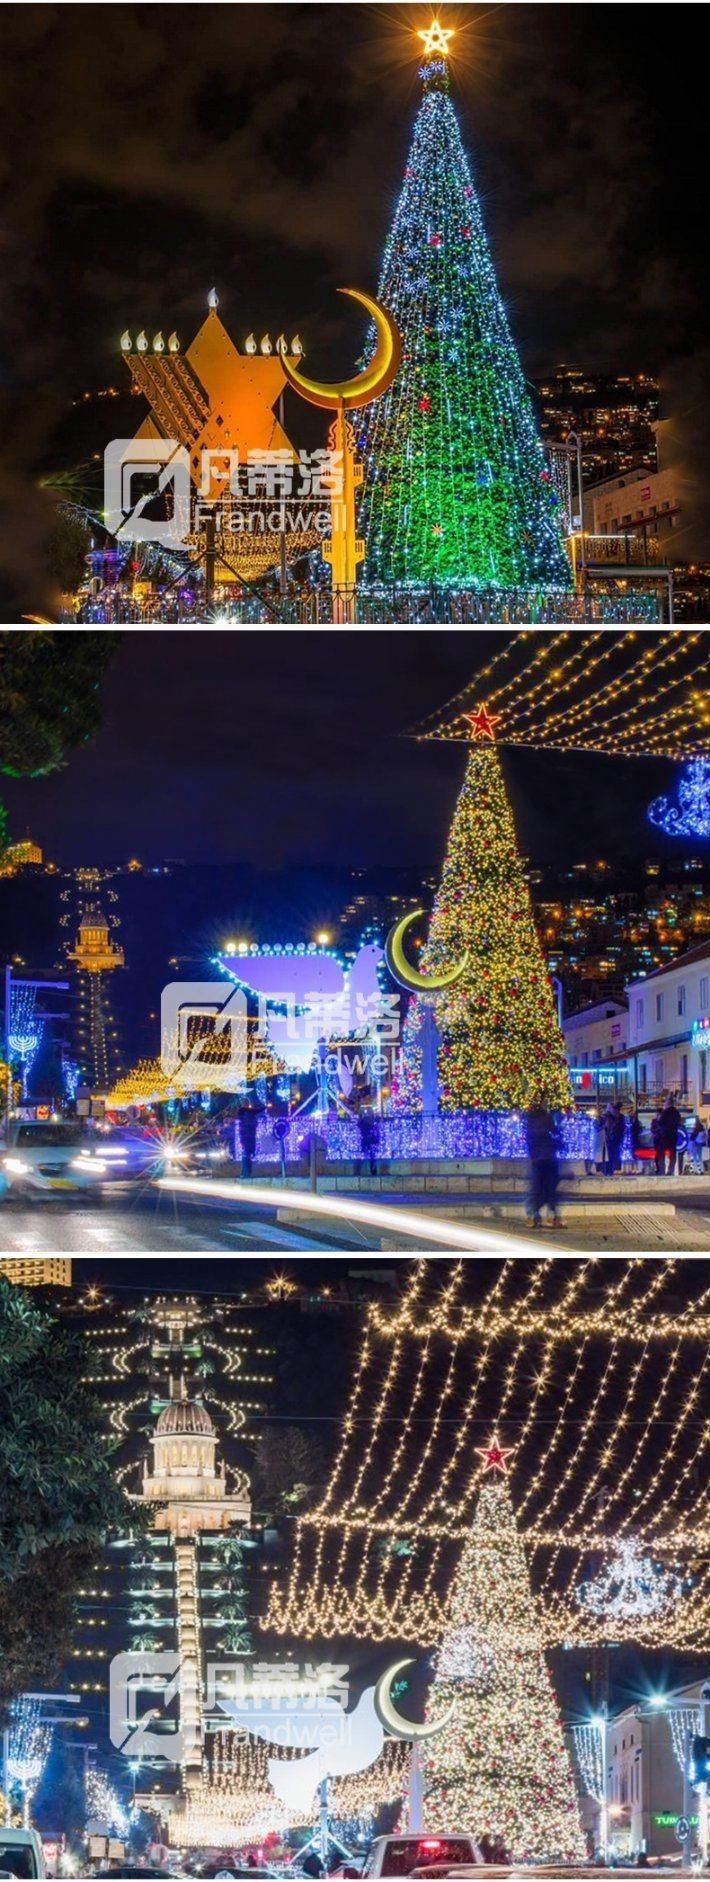 Giant Outdoor Unique 6m 8m 9m 10m 12m Pre Lit Large Christmas Tree with LED Light Decoration for Shopping Center